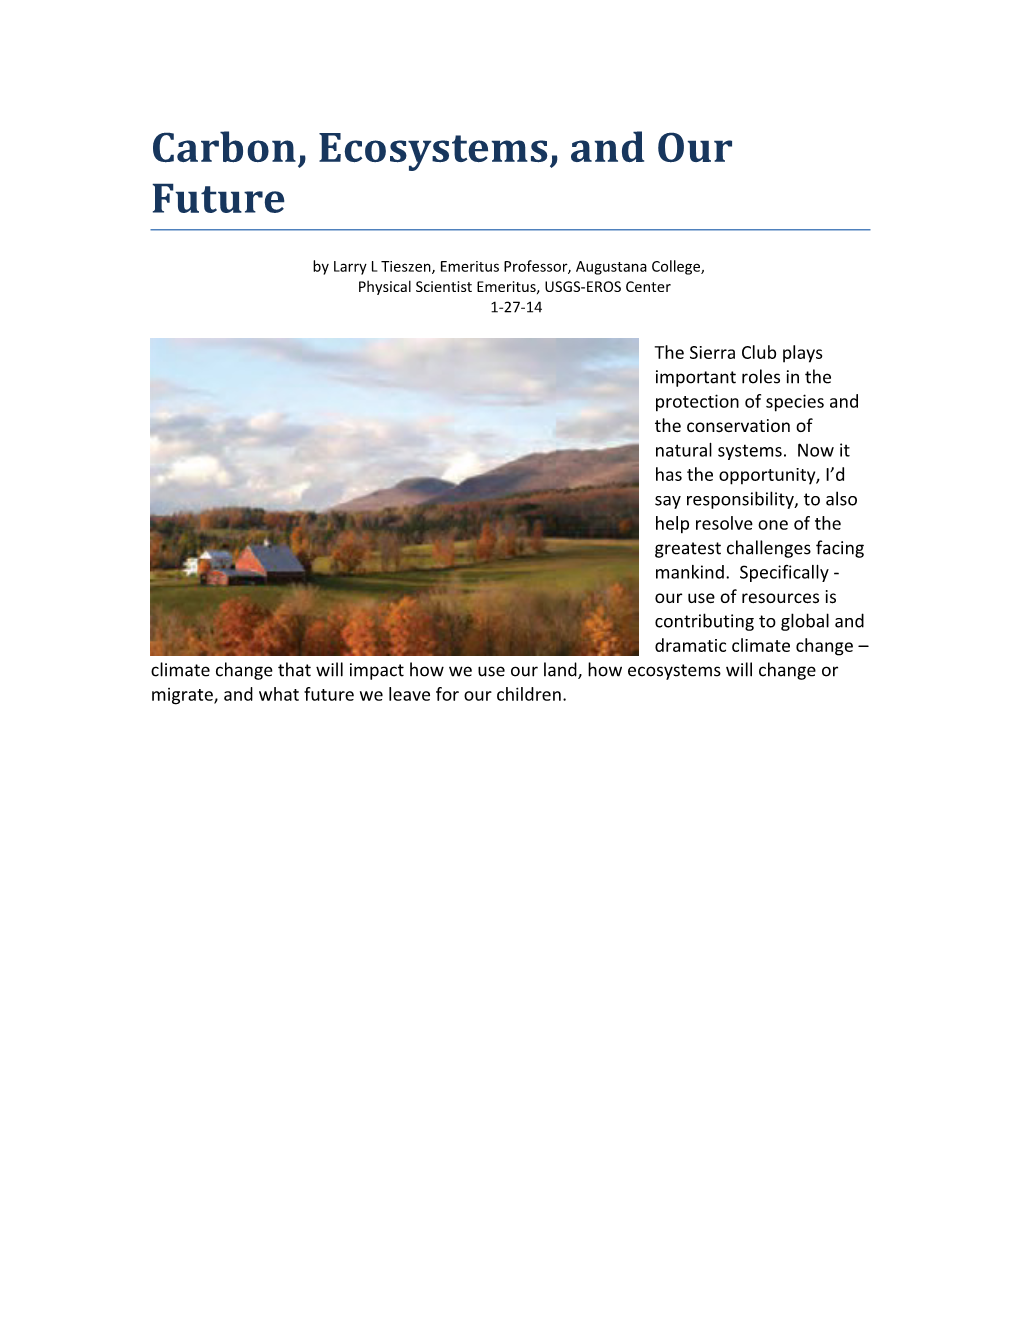 Carbon, Ecosystems, and Our Future